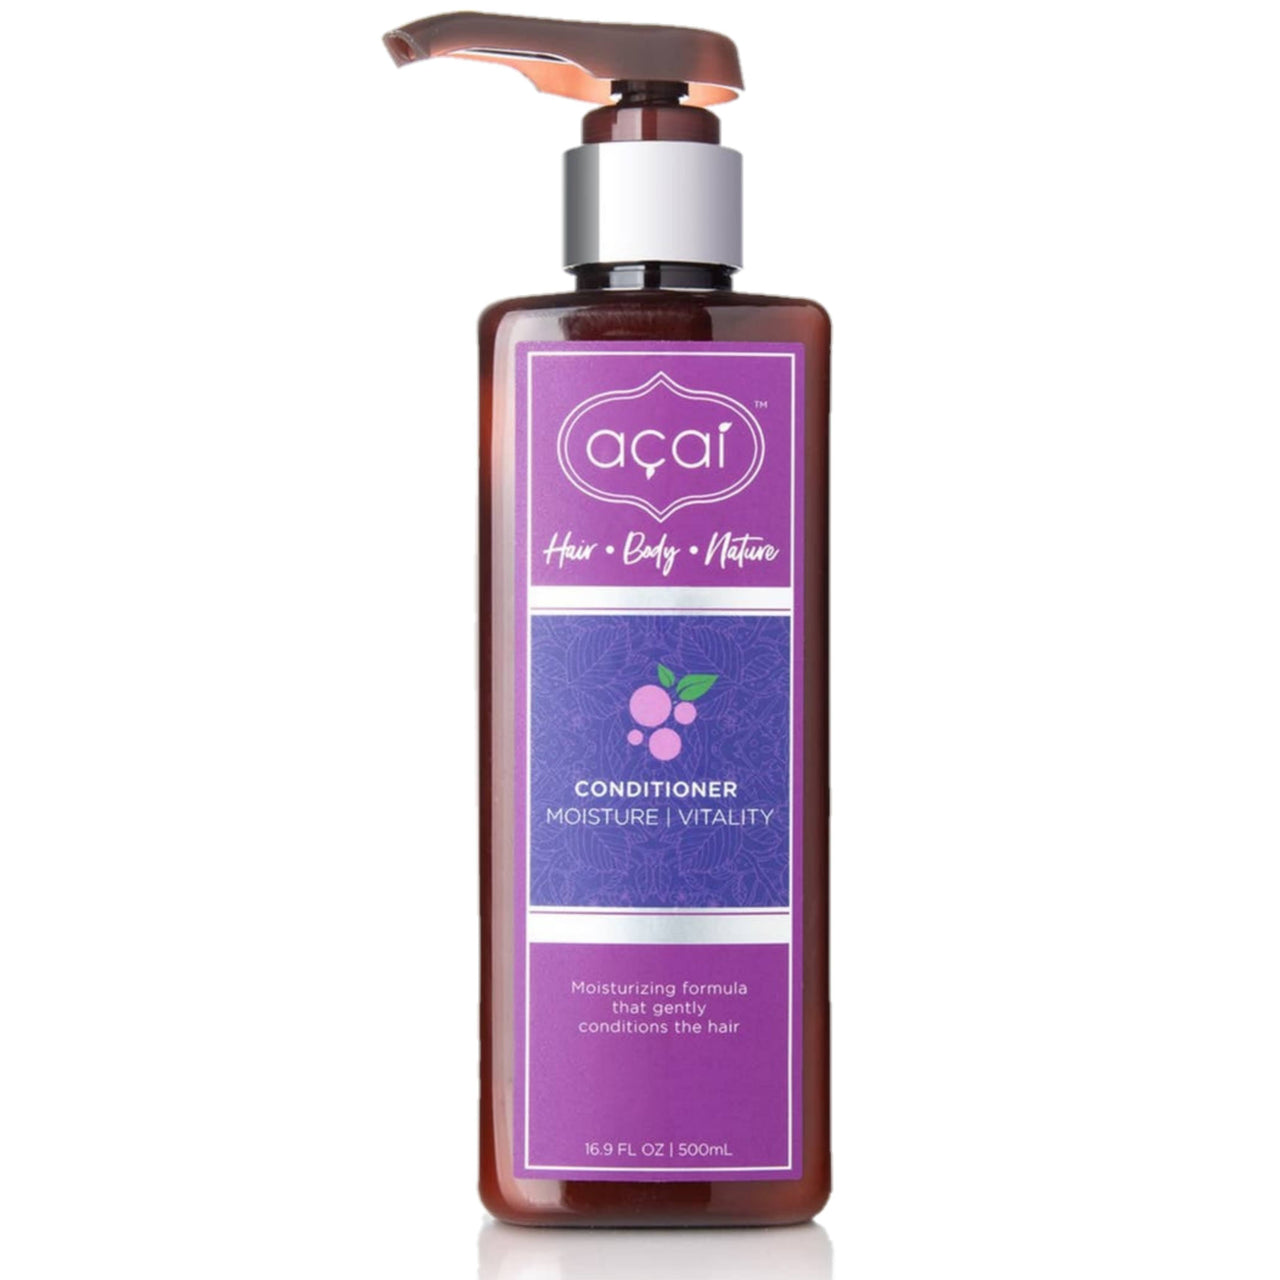 Acai Conditioner Moisturizing Formula Gently Conditions Hair Composed Of Natural Anti-oxidants And Extracts From The Acai Super Fruit